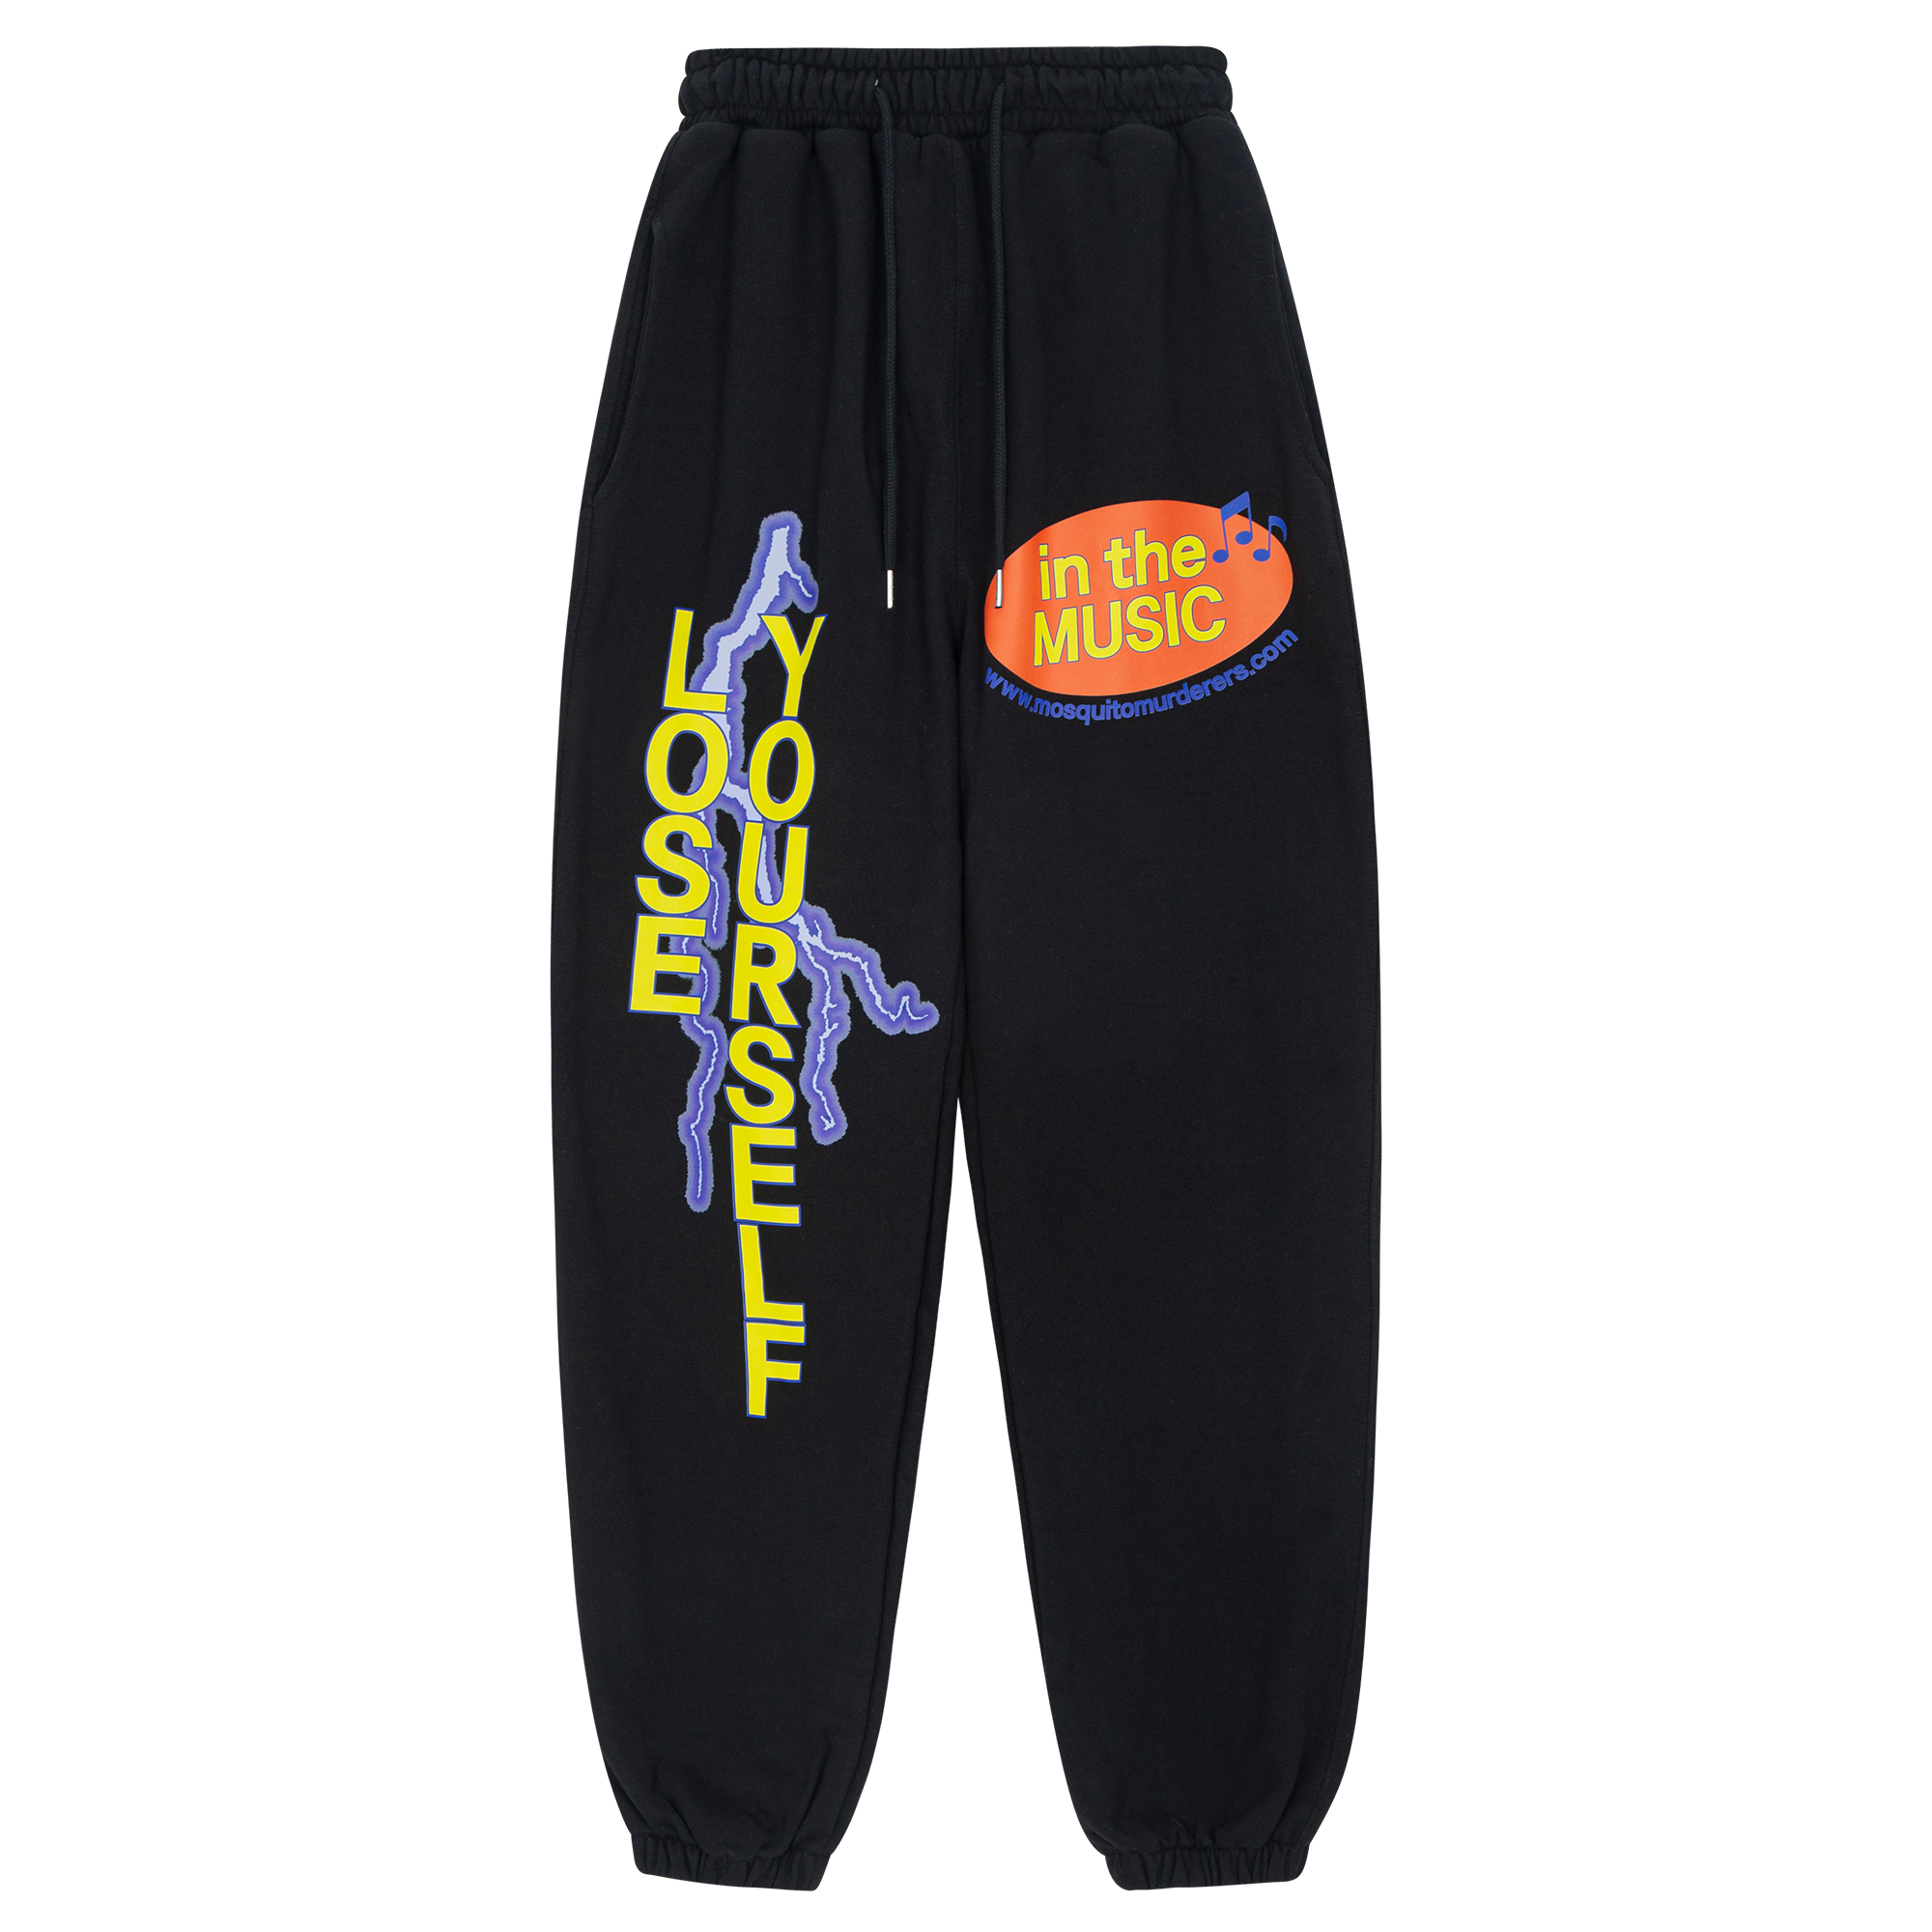 LOSE YOURSELF in the music SWEATPANTS (Black)